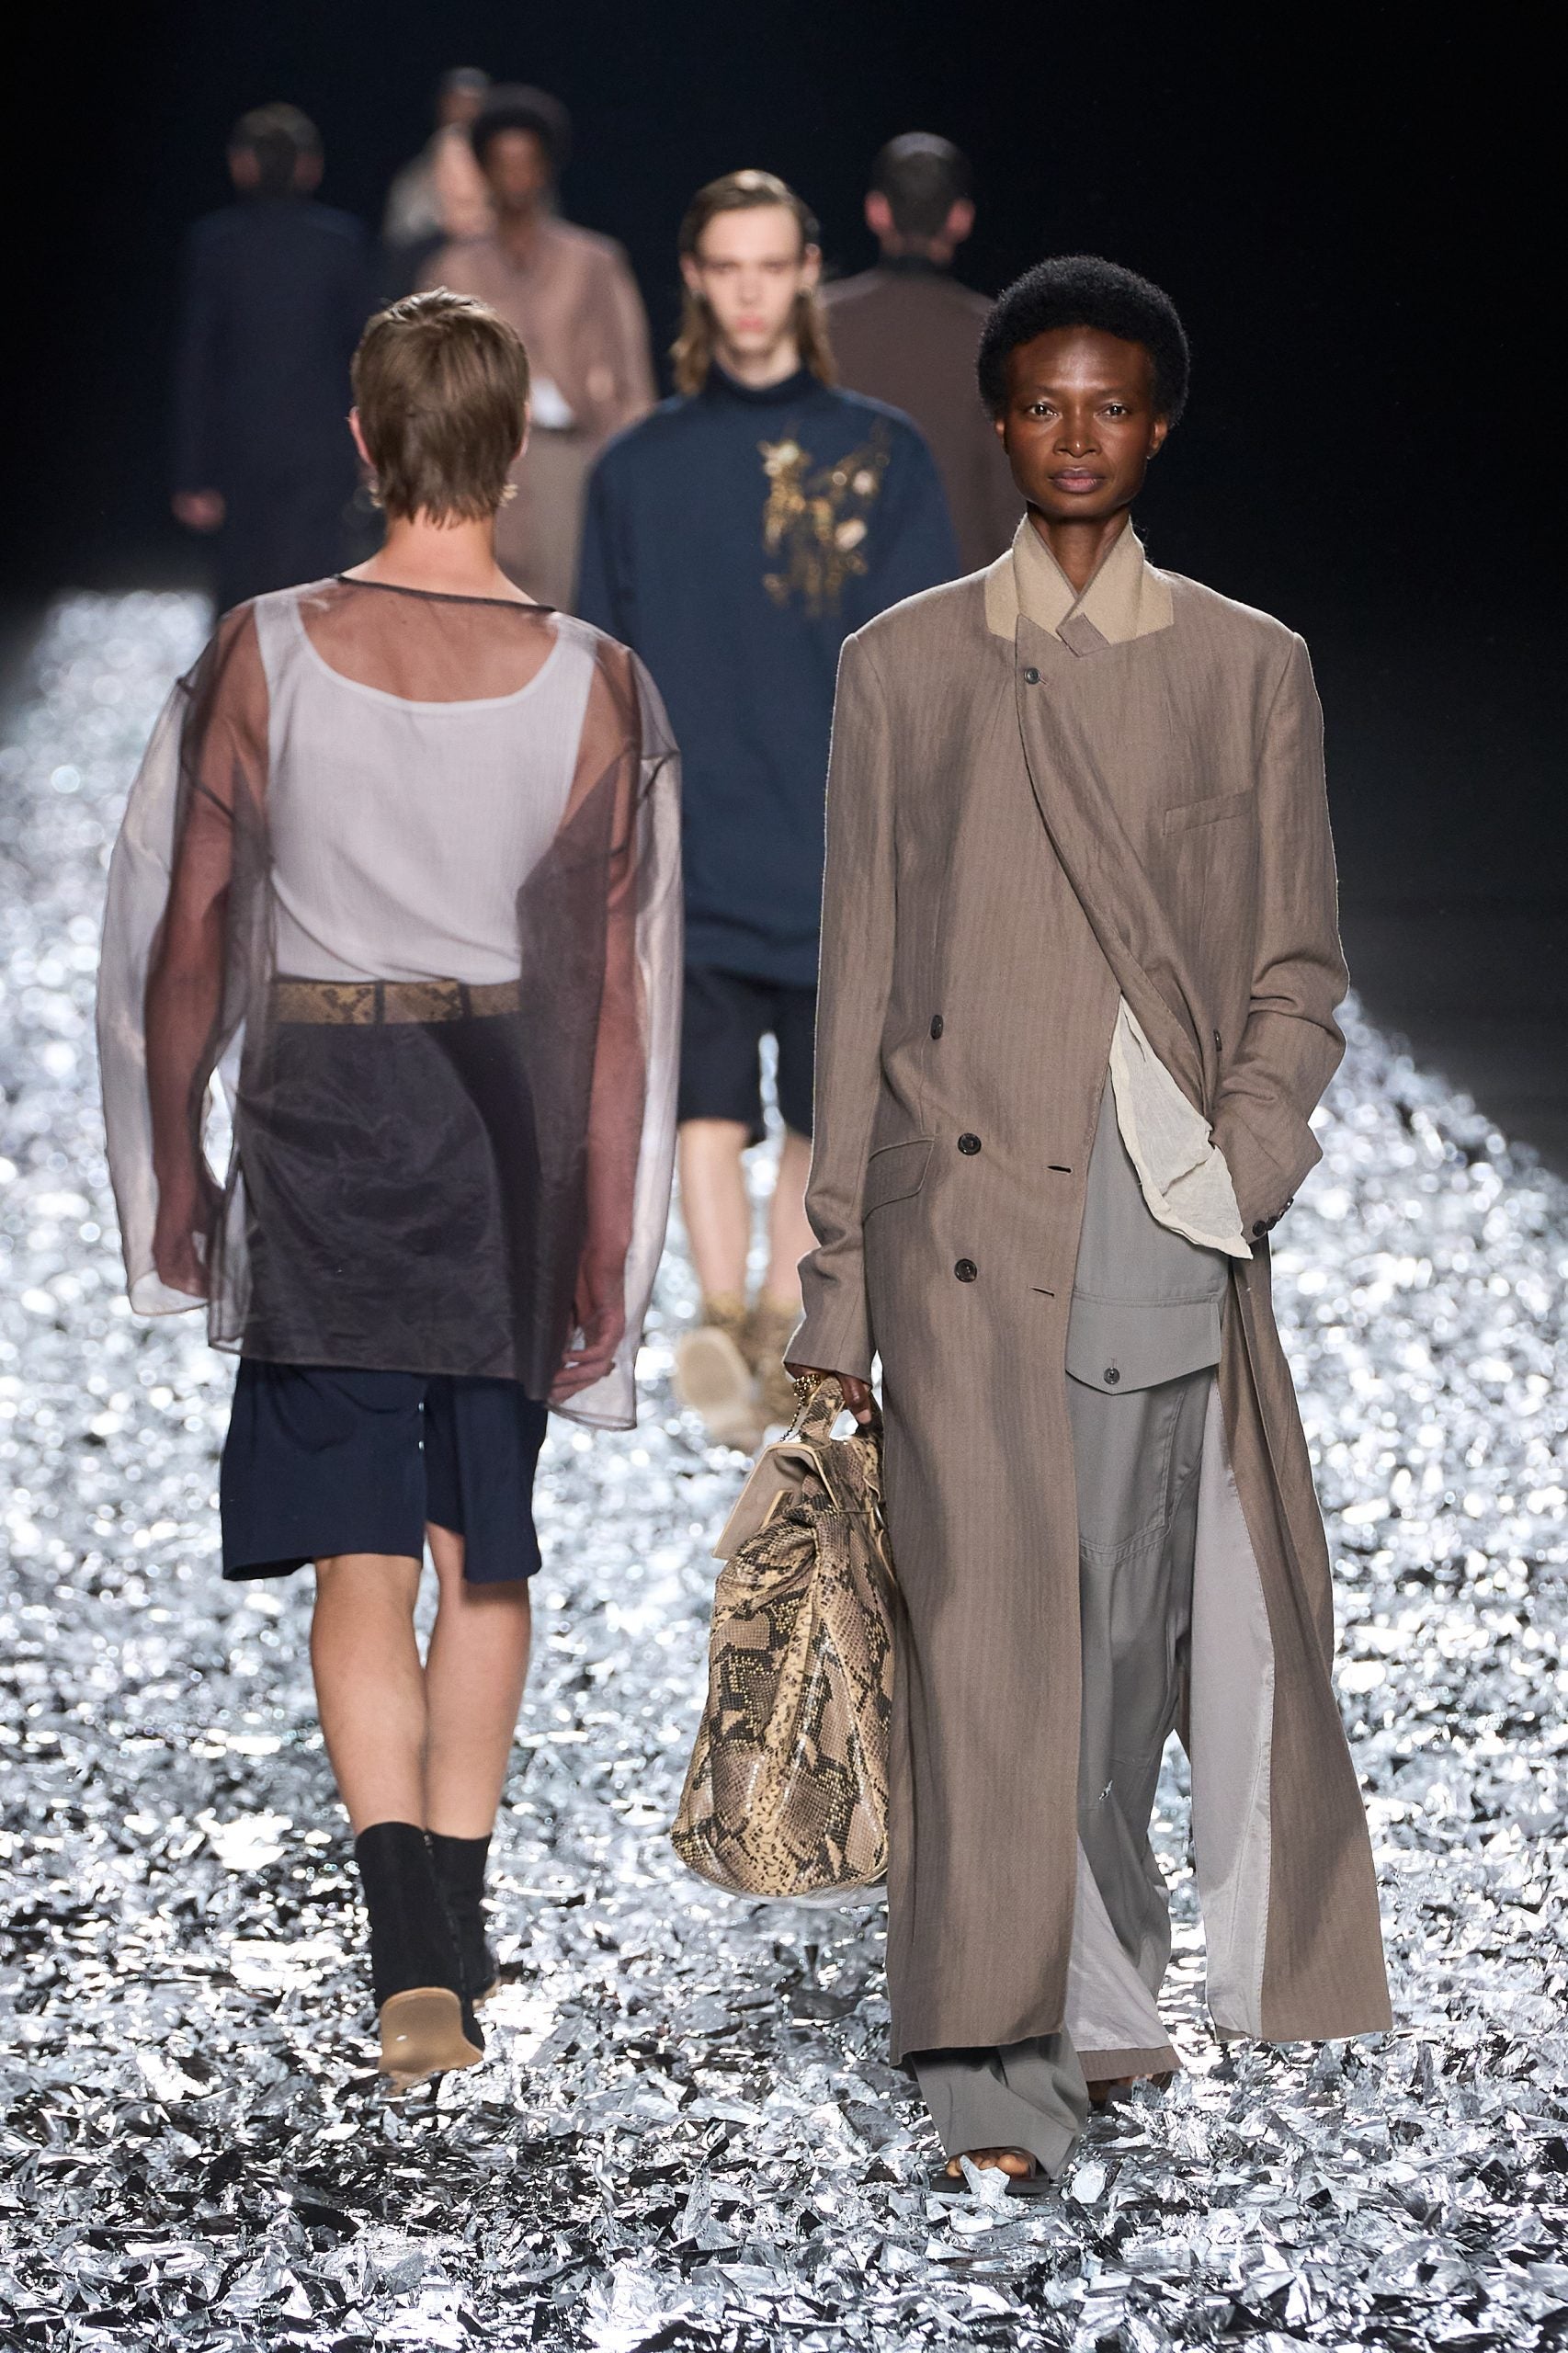 Paris Fashion Week Men’s Trends Spotted On The Runway